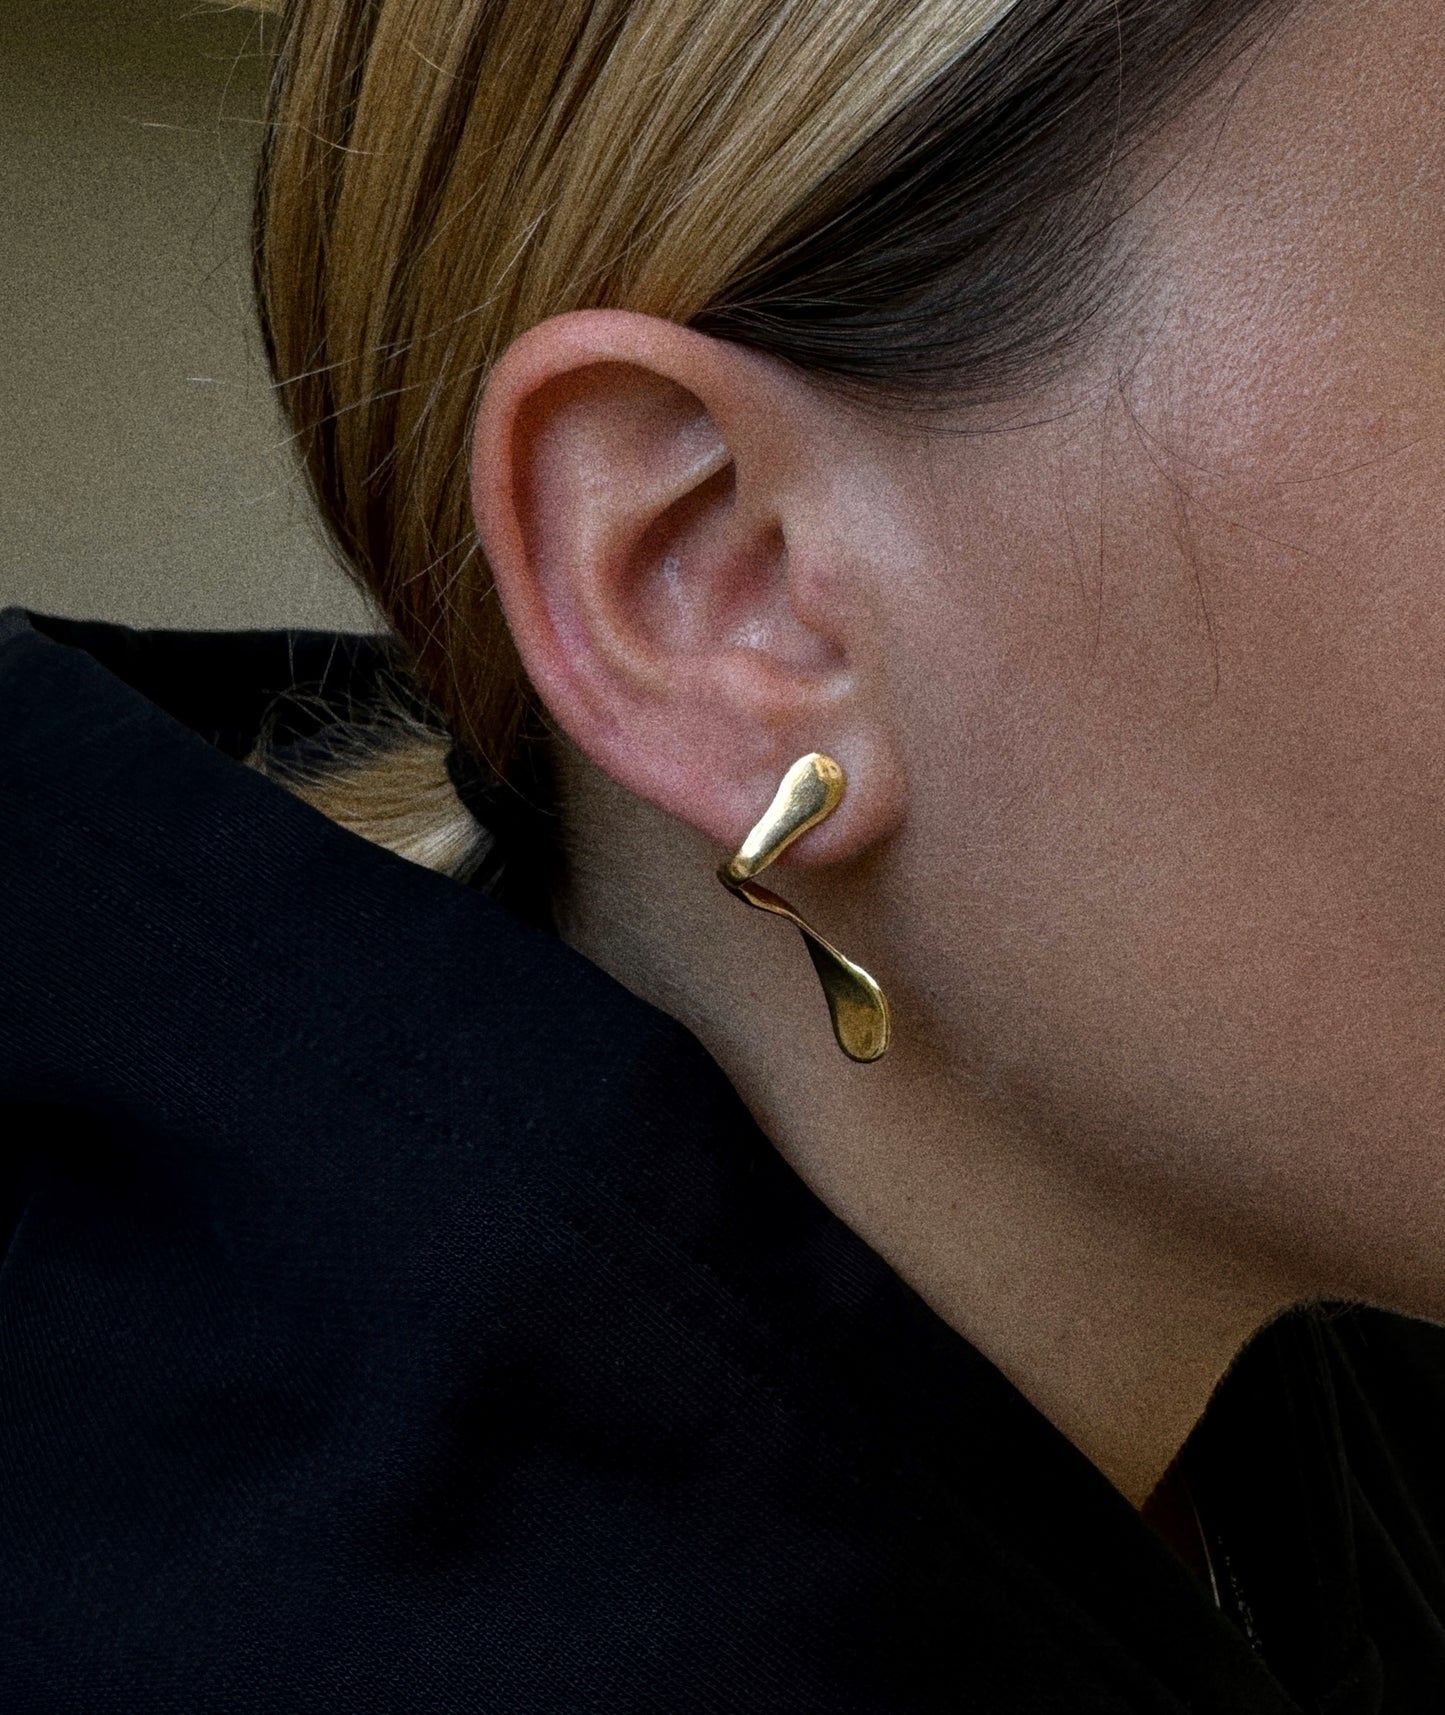 The melted ear piece Gold plated